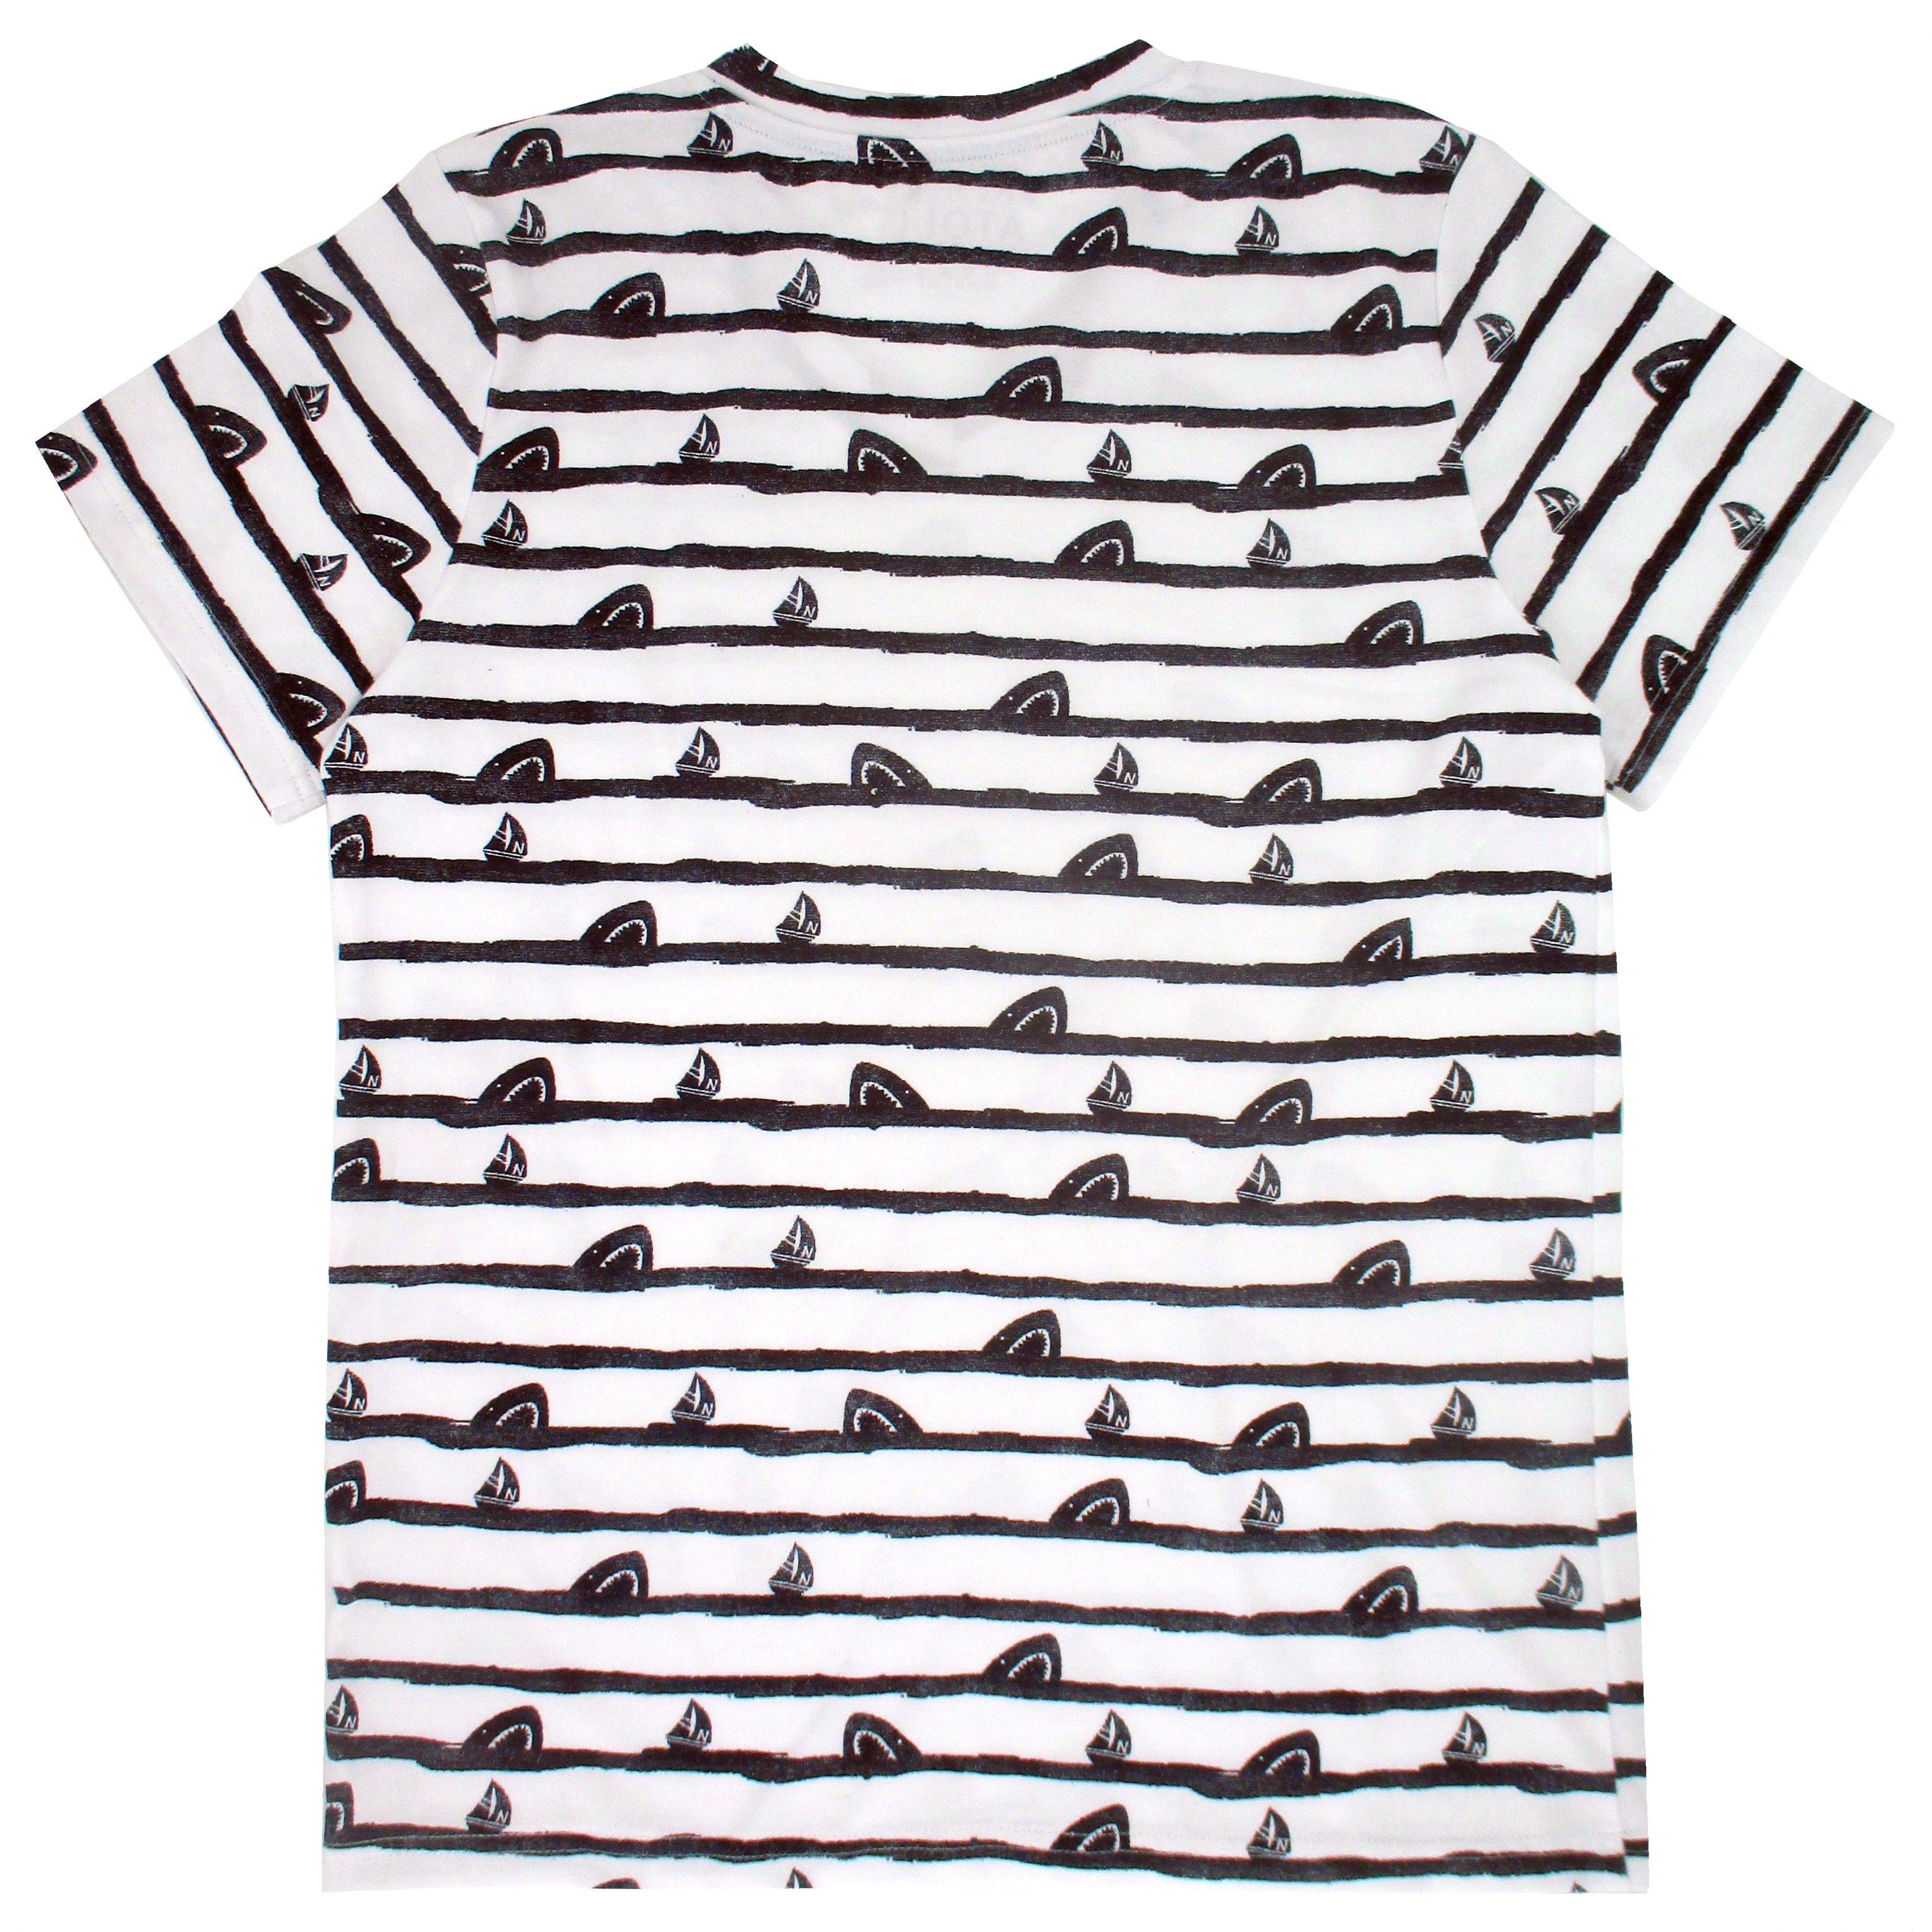 Rock Atoll Shark and Sailboat Waves Striped Tee in White